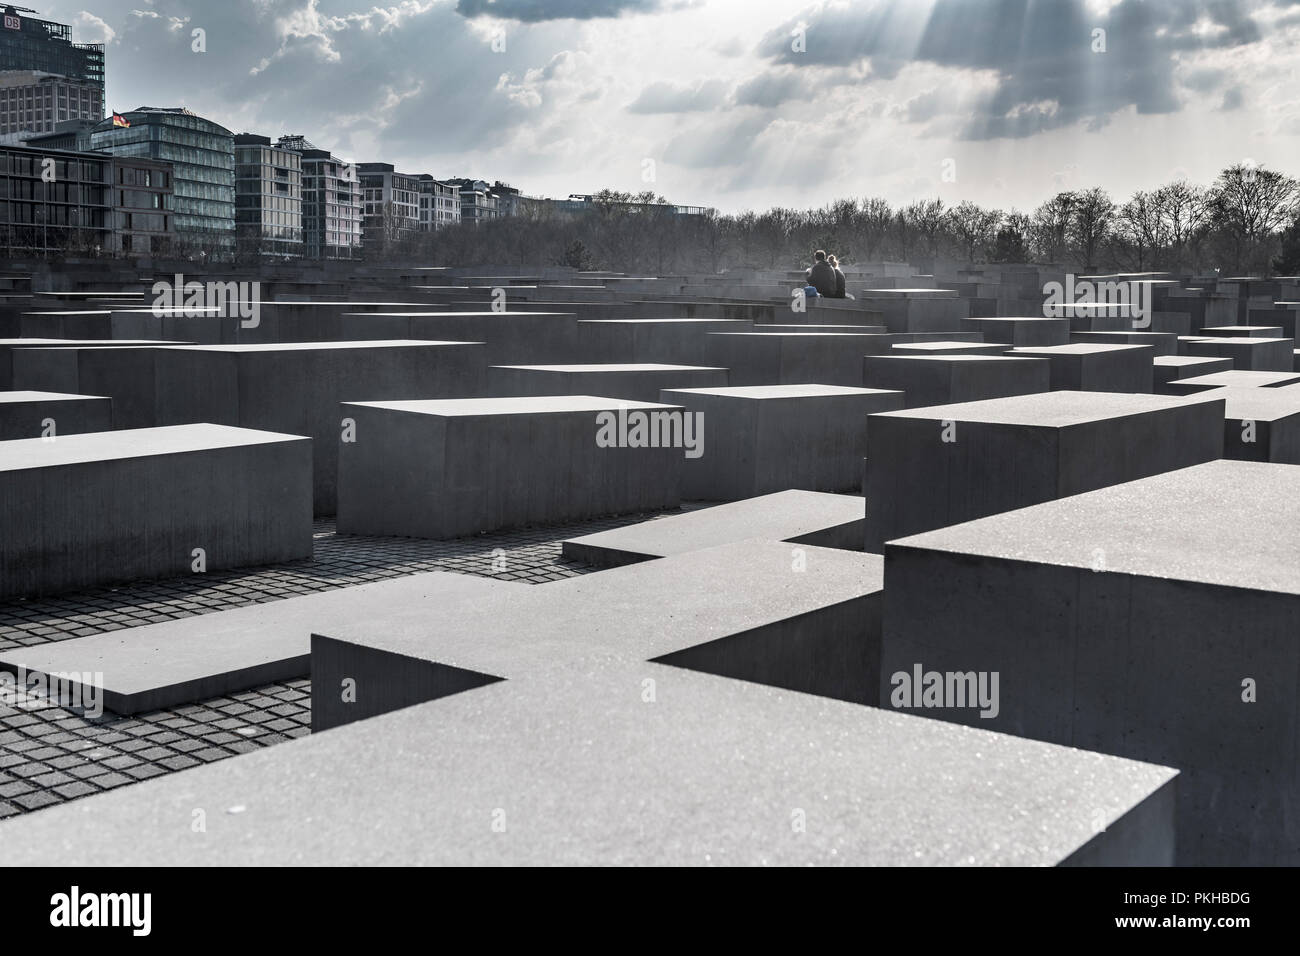 The Holocaust Memorial in Berlin is a memorial to the murdered Jews of Europe, designed by architect Peter Eisenman and engineer Buro Happold. Stock Photo